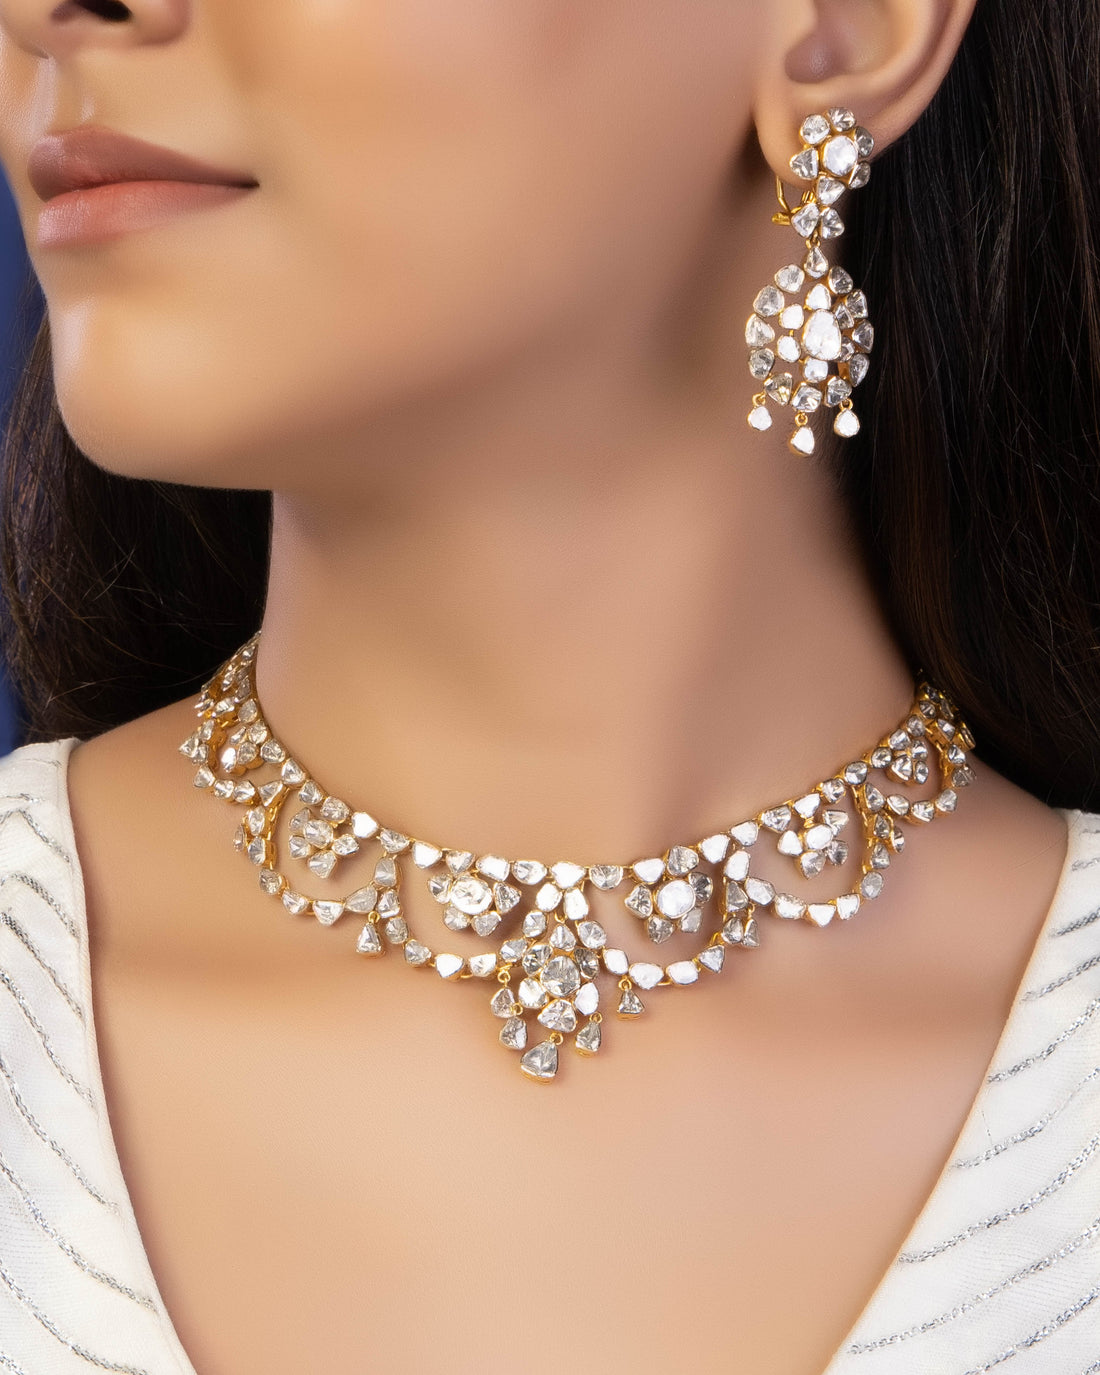 Polki Necklace and Long Earrings Set - Glamorous Ensemble from Rocky and Rani Collection